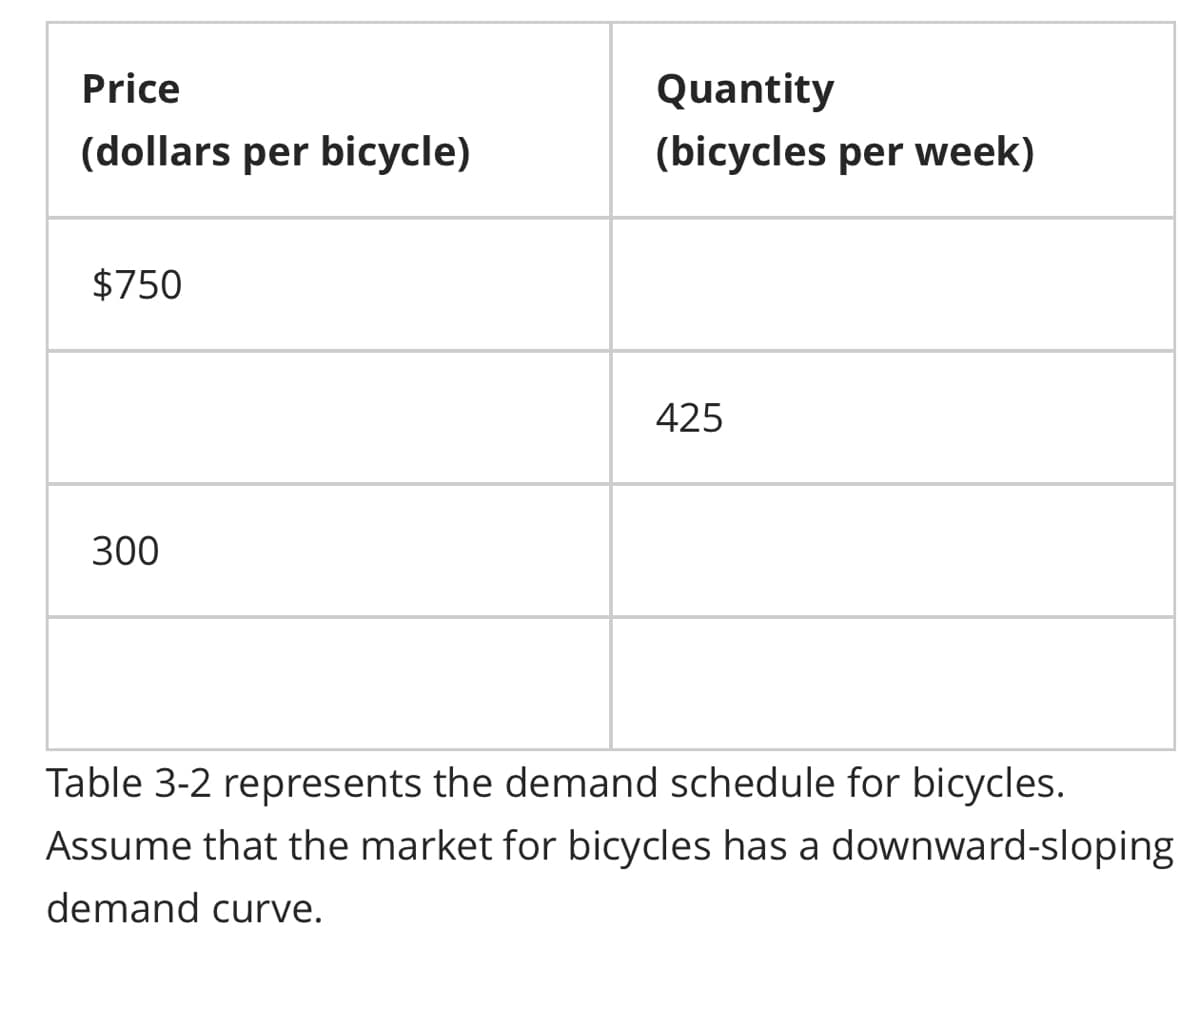 Price
(dollars per bicycle)
$750
300
Quantity
(bicycles per week)
425
Table 3-2 represents the demand schedule for bicycles.
Assume that the market for bicycles has a downward-sloping
demand curve.